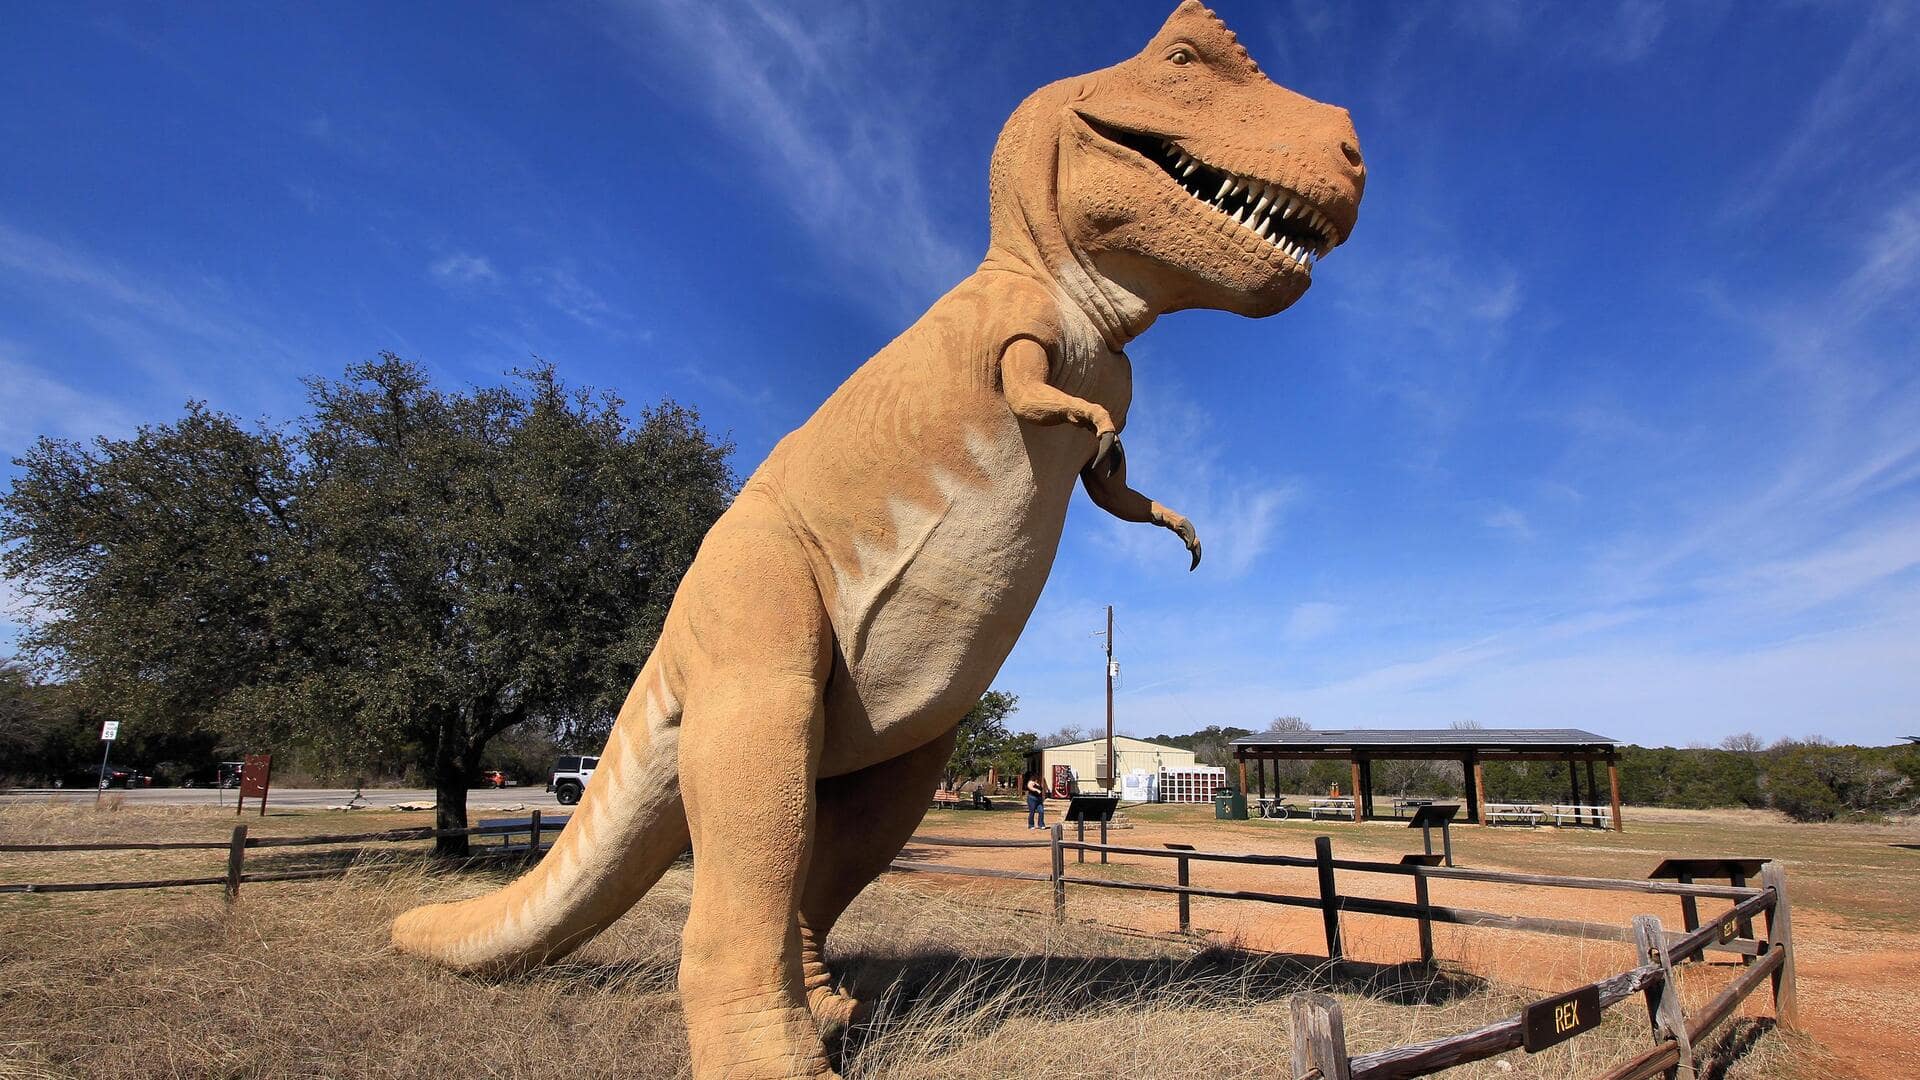 Step back in time at Dinosaur Valley State Park, Texas